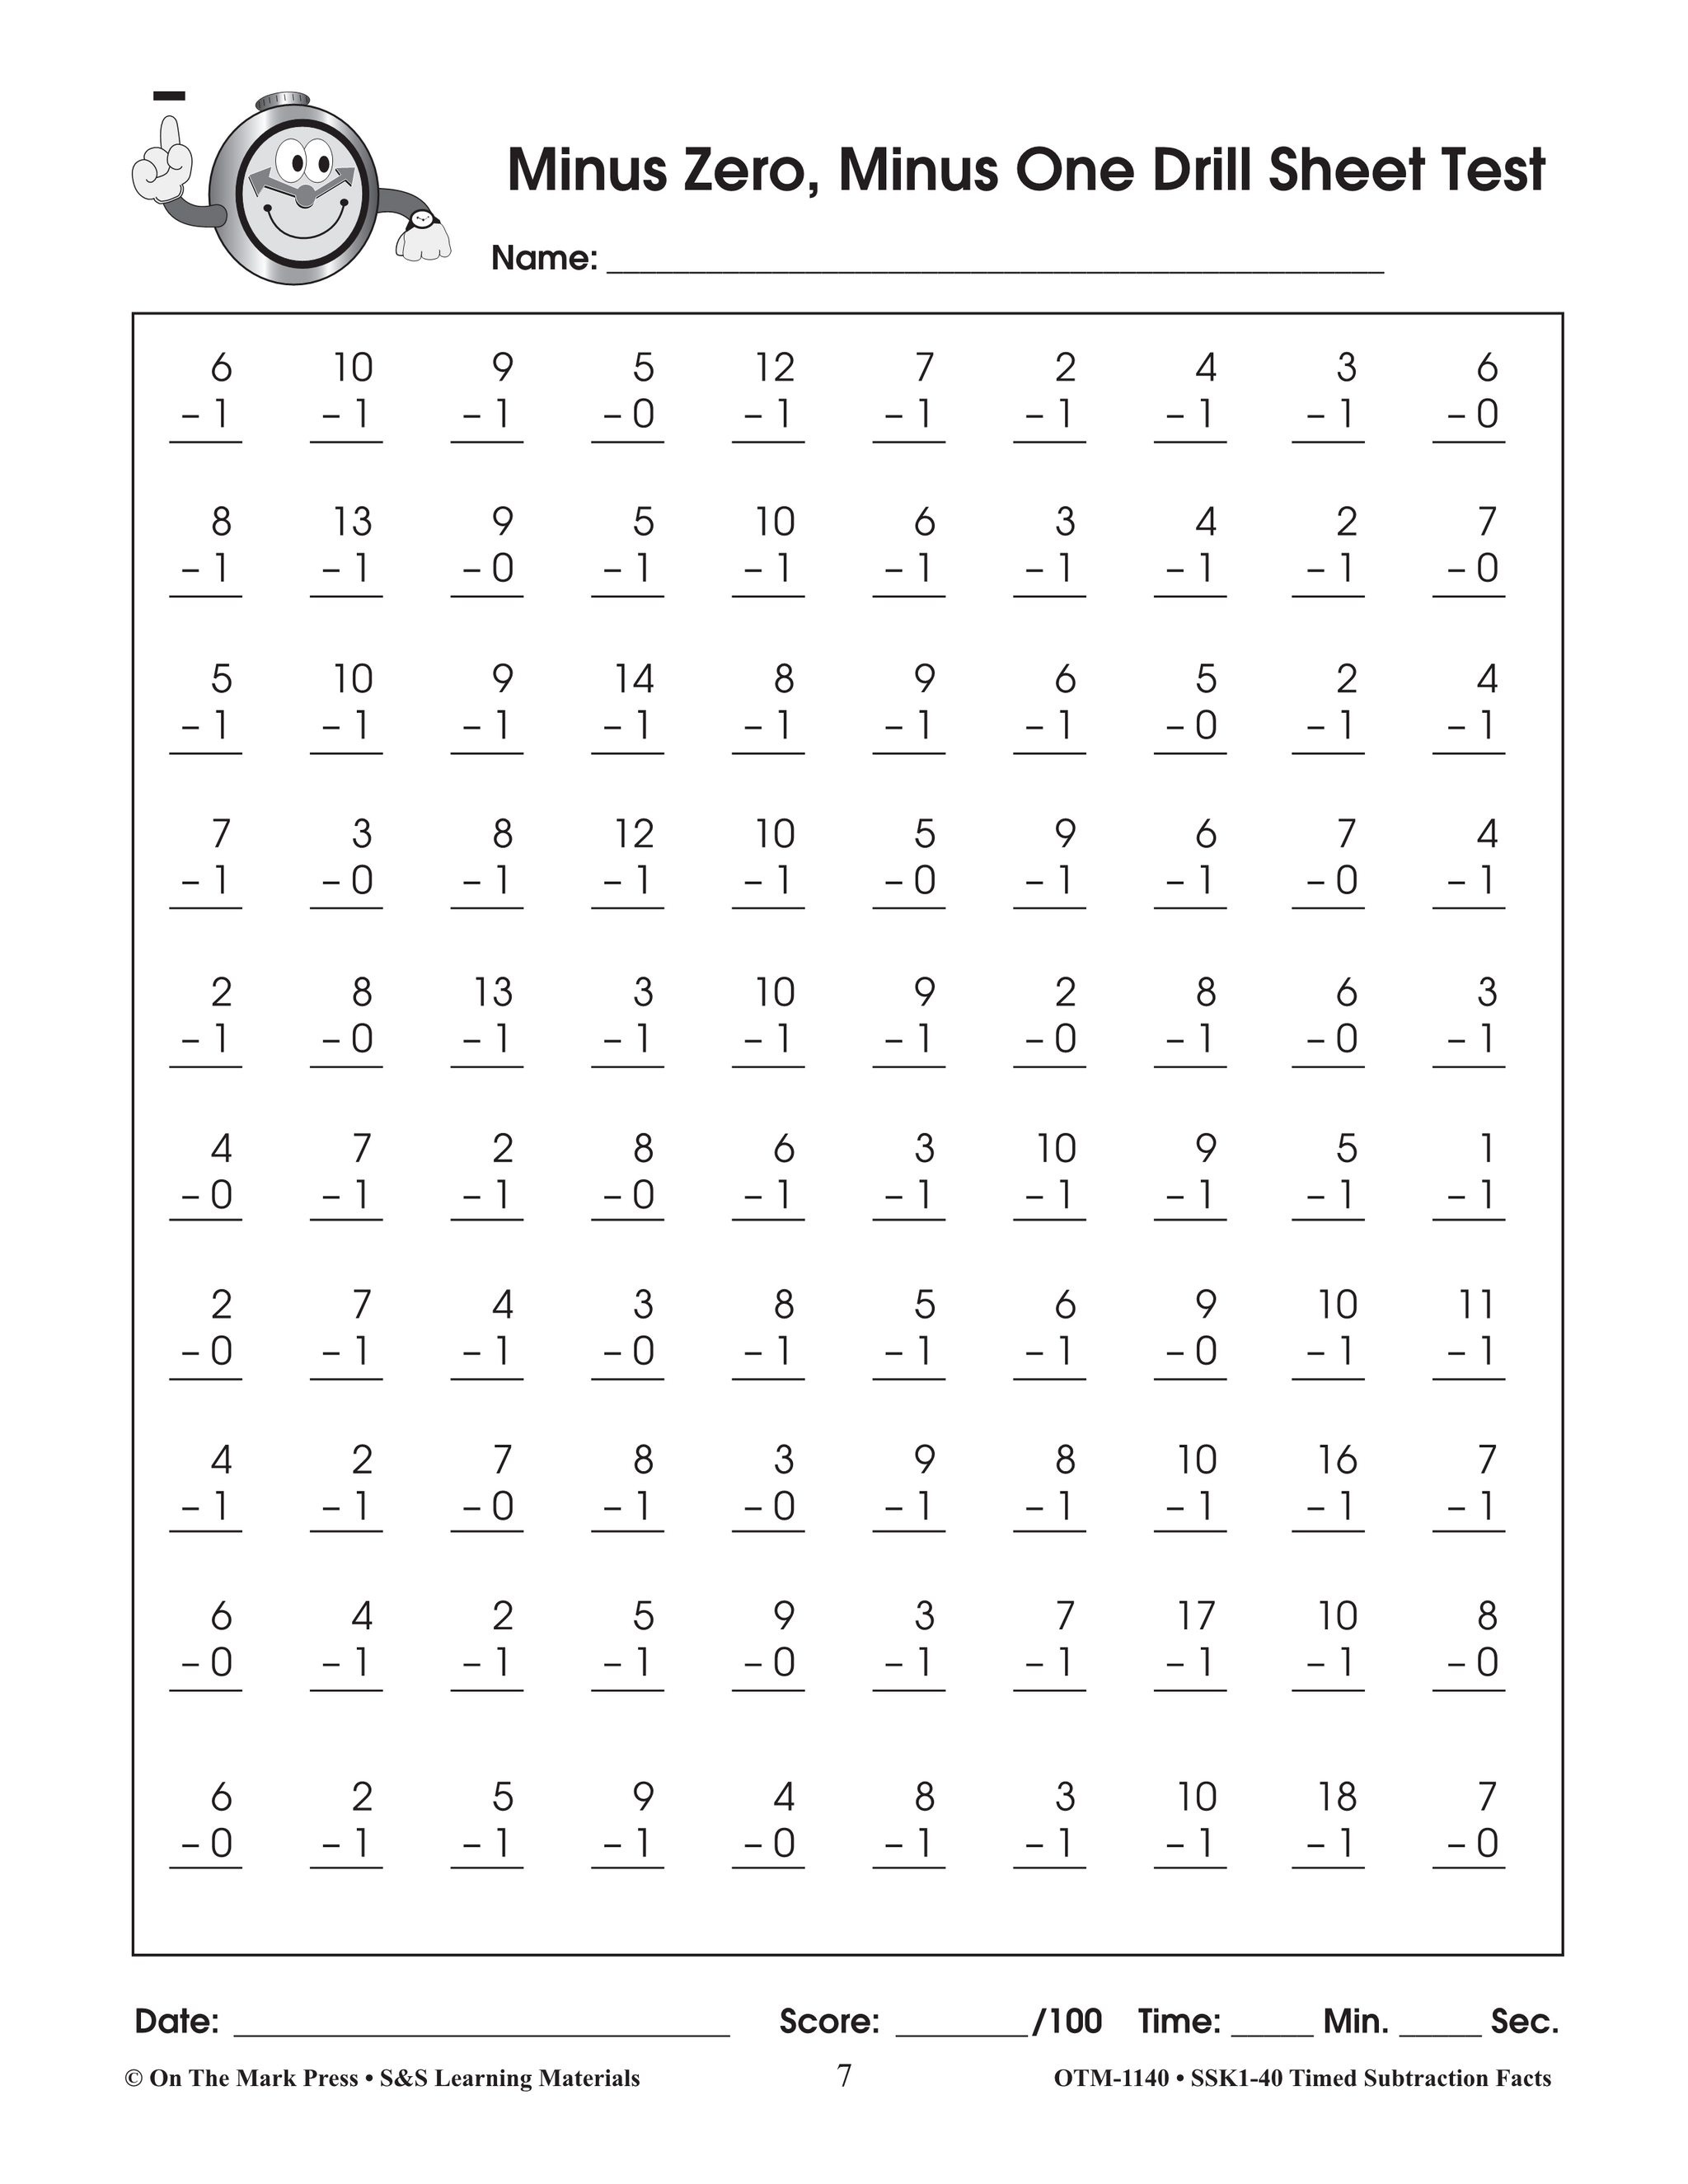 timed-subtraction-math-facts-worksheets-1st-grade-free-printable-it-gambaran